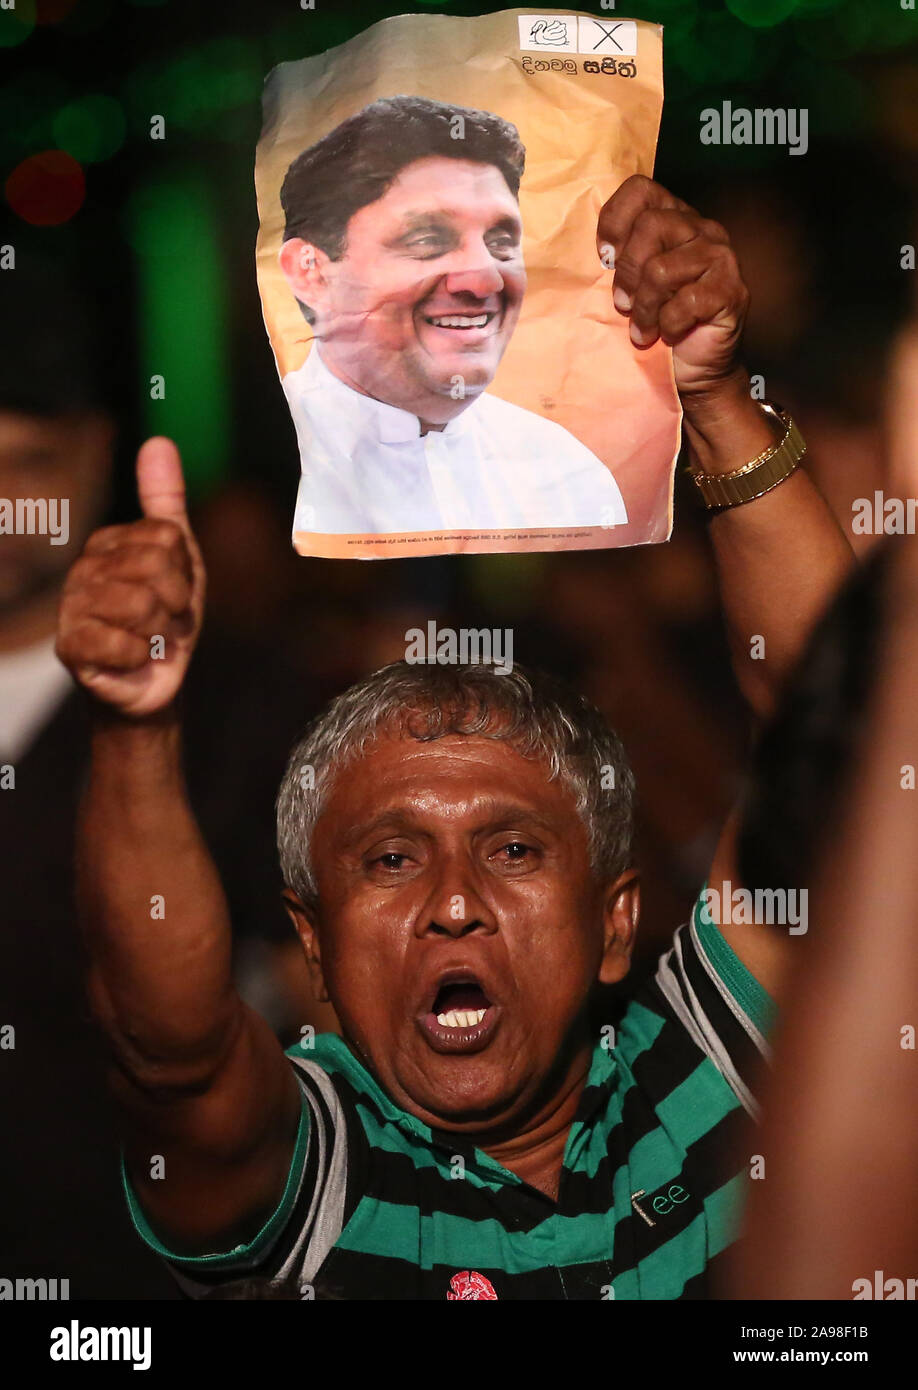 Colombo, western province, Sri Lanka. 13th Nov, 2019. Supporter of the ruling United National Party (UNP) and New Democratic Front (NDF) presidential candidate Sajith Premadasa attend a final campaign rally under rain in Colombo on November 13, 2019, ahead of the November 16 presidential election. Police stepped up security across Sri Lanka on November 13 over fears of violence on the final day of campaigning for the fiercely contested presidential election, officials said. Credit: Pradeep Dambarage/ZUMA Wire/Alamy Live News Stock Photo